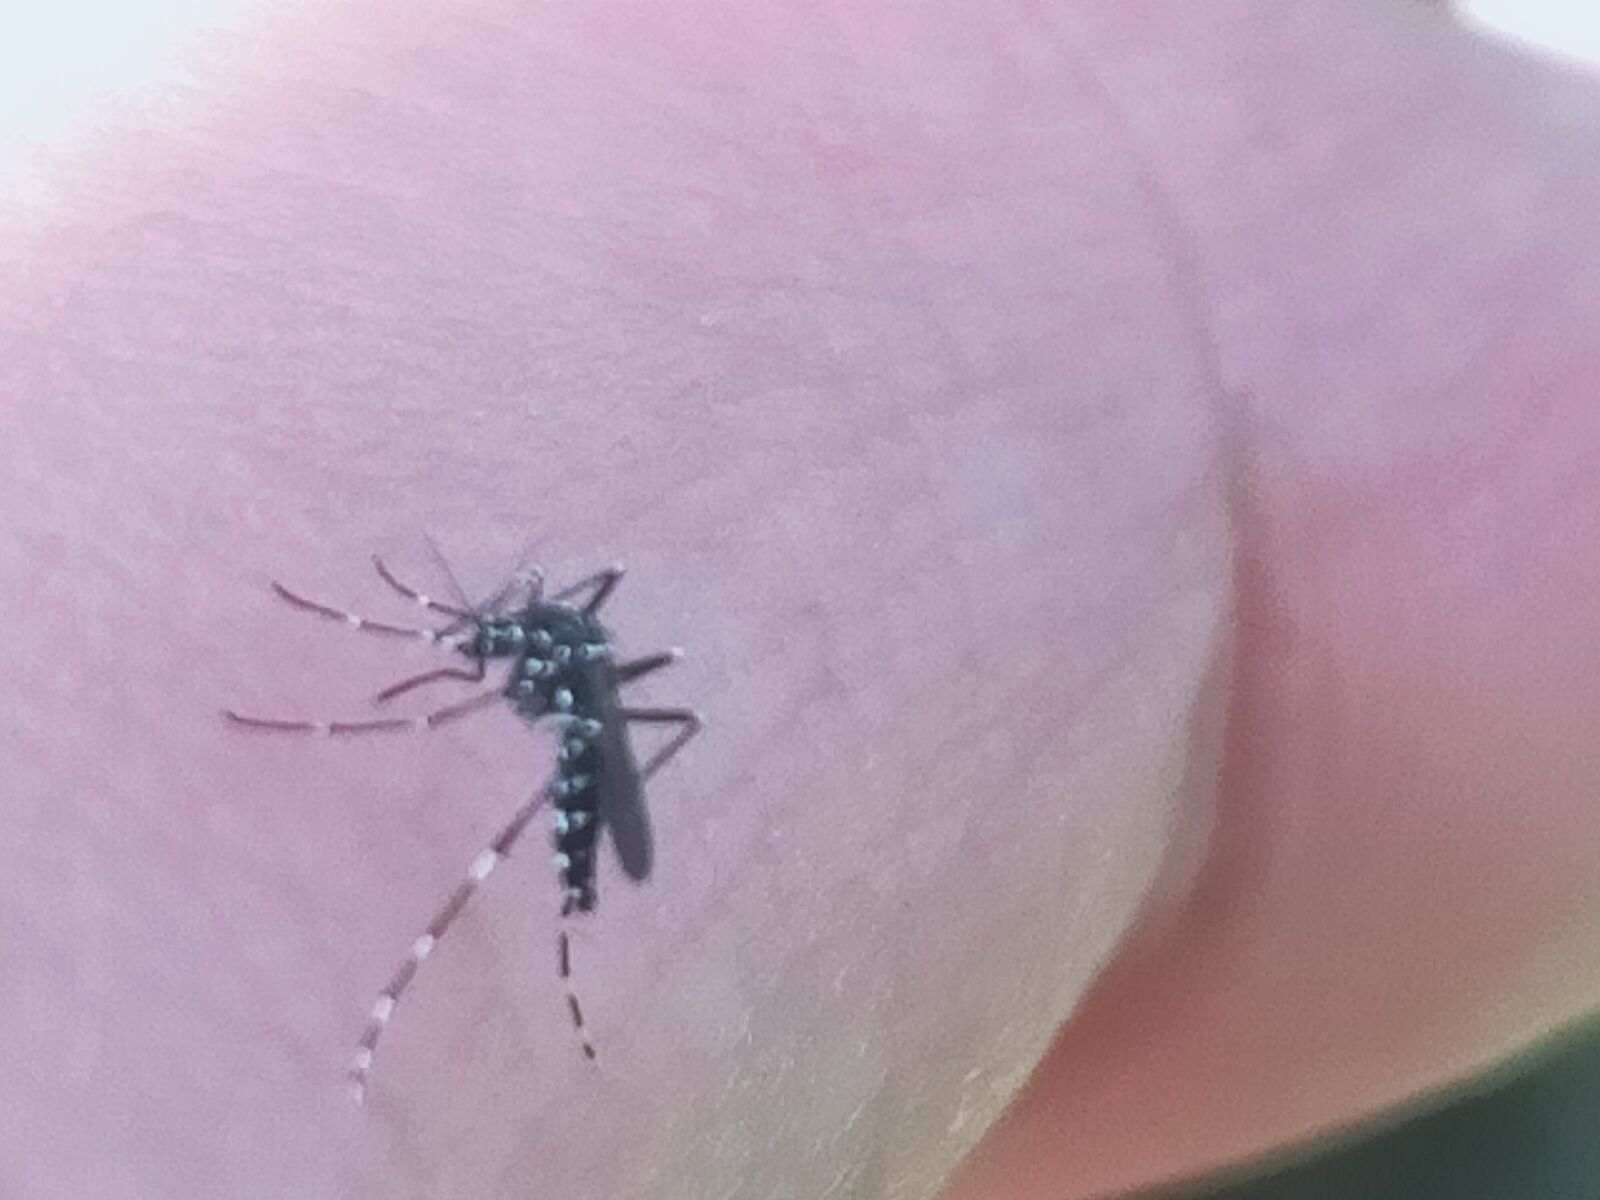 OPPO A9 2020 sample photo. Mosquito, striped, dengue fever photography